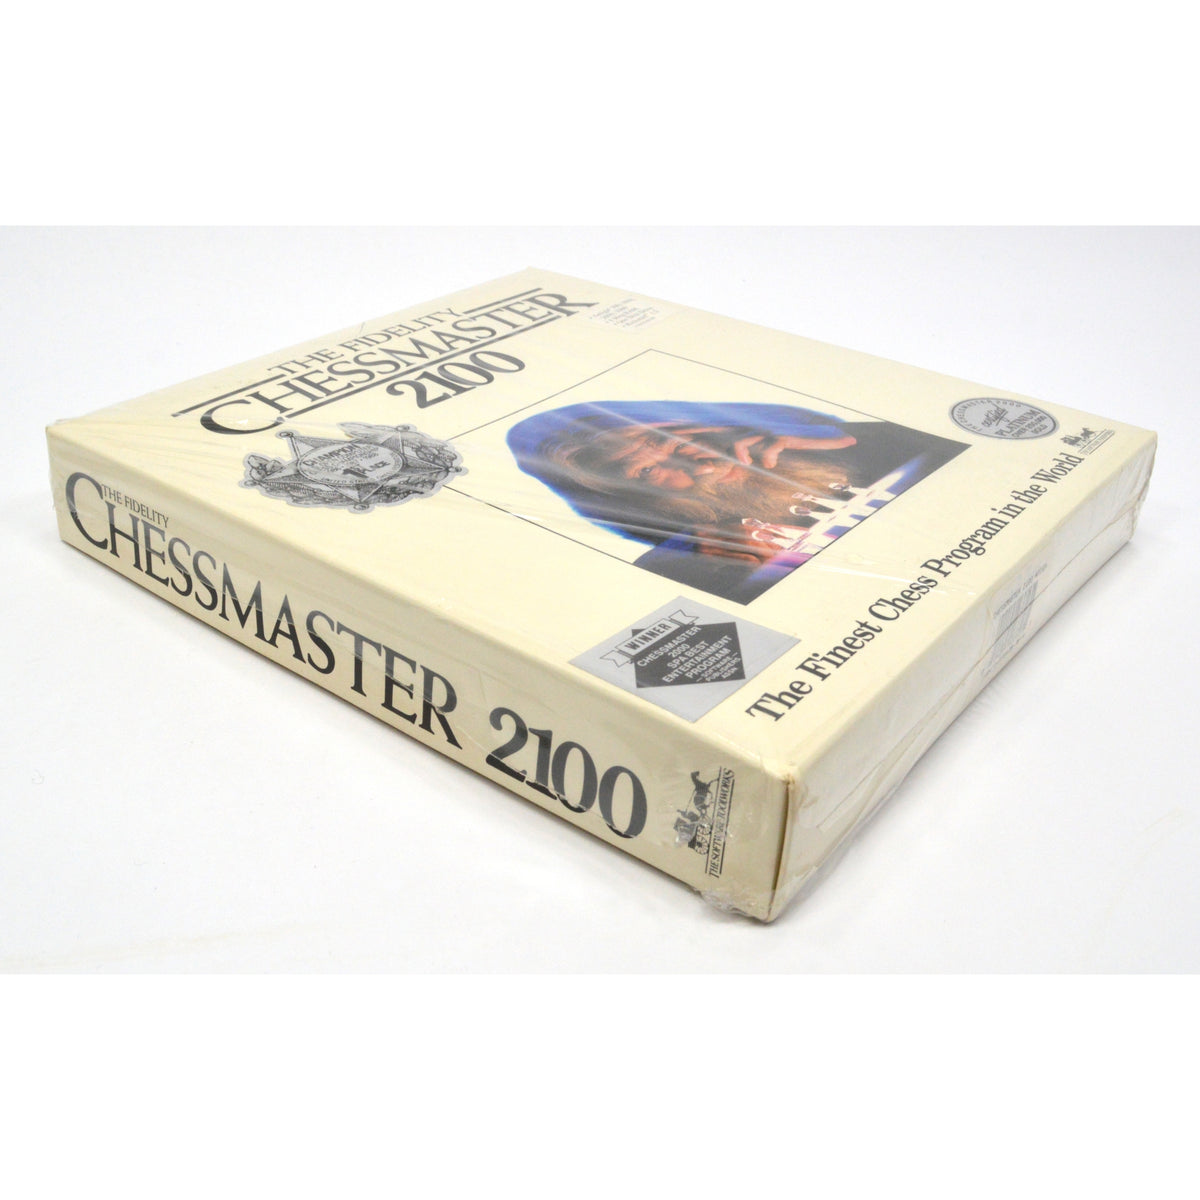 Commodore Amiga SOFTWARE TOOLWORKS THE CHESSMASTER 2000 Software Game BOXED